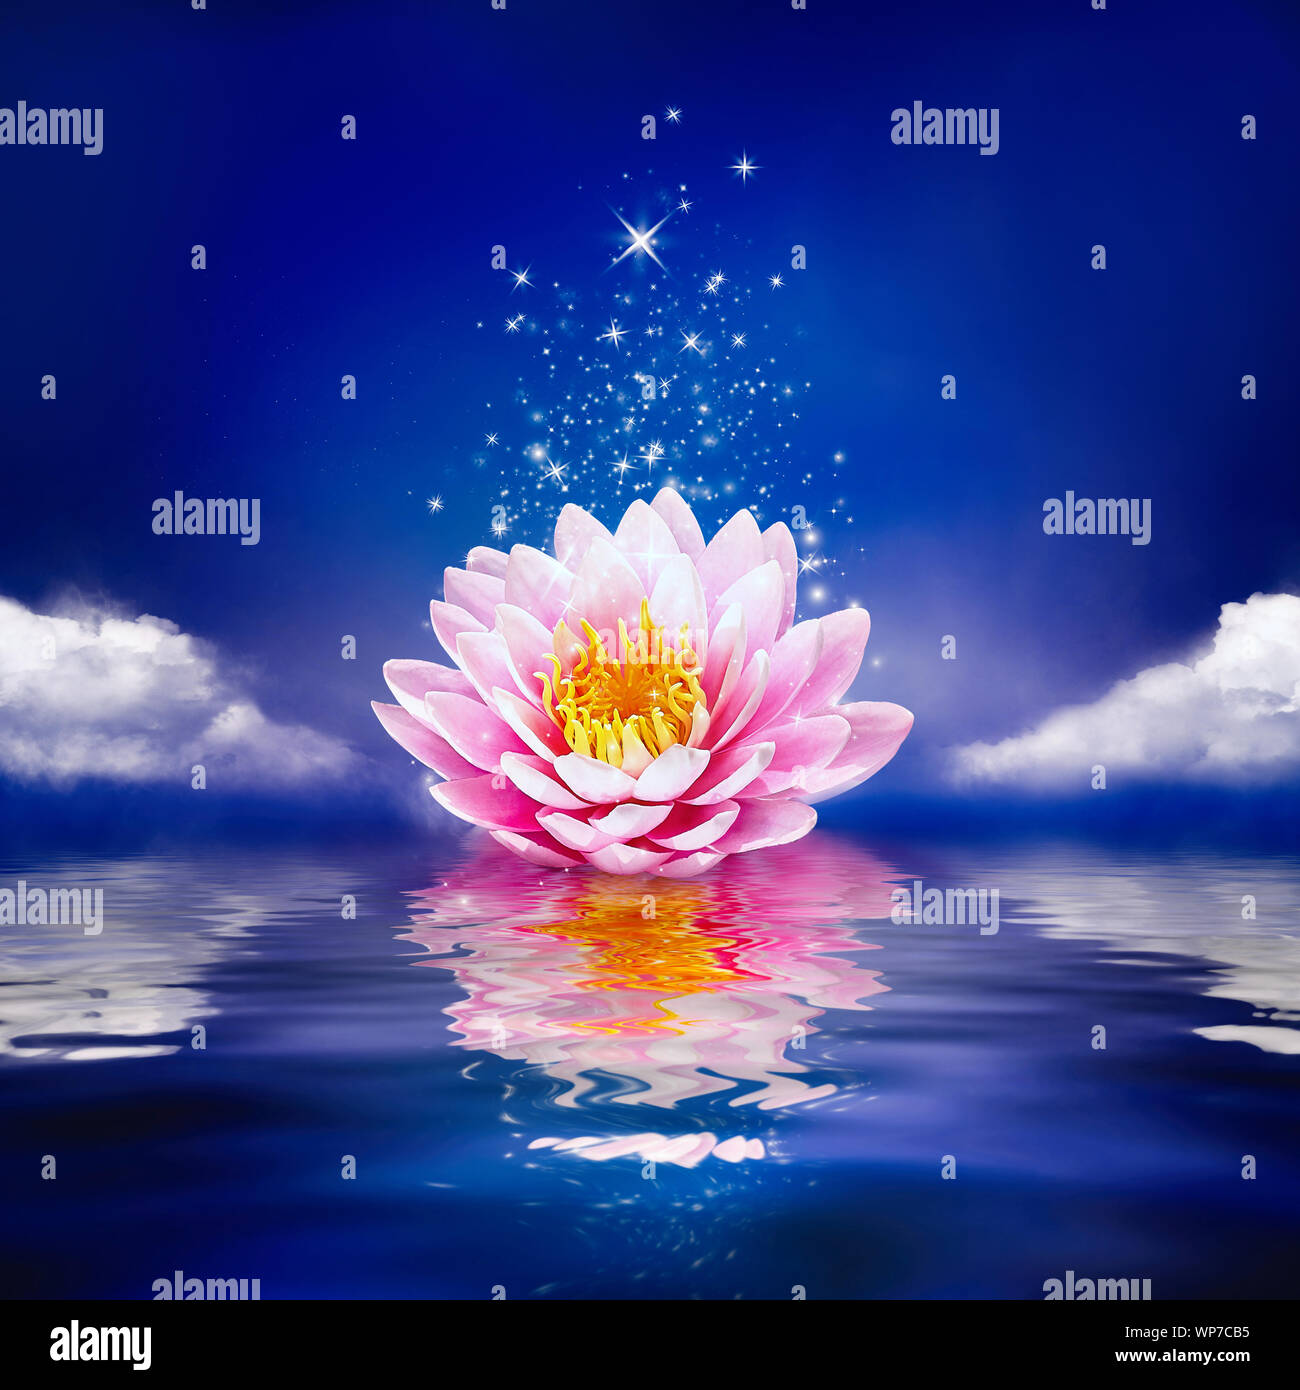 Beautiful magic flower on water. Waterlily or lotus and moon in night. Stock Photo